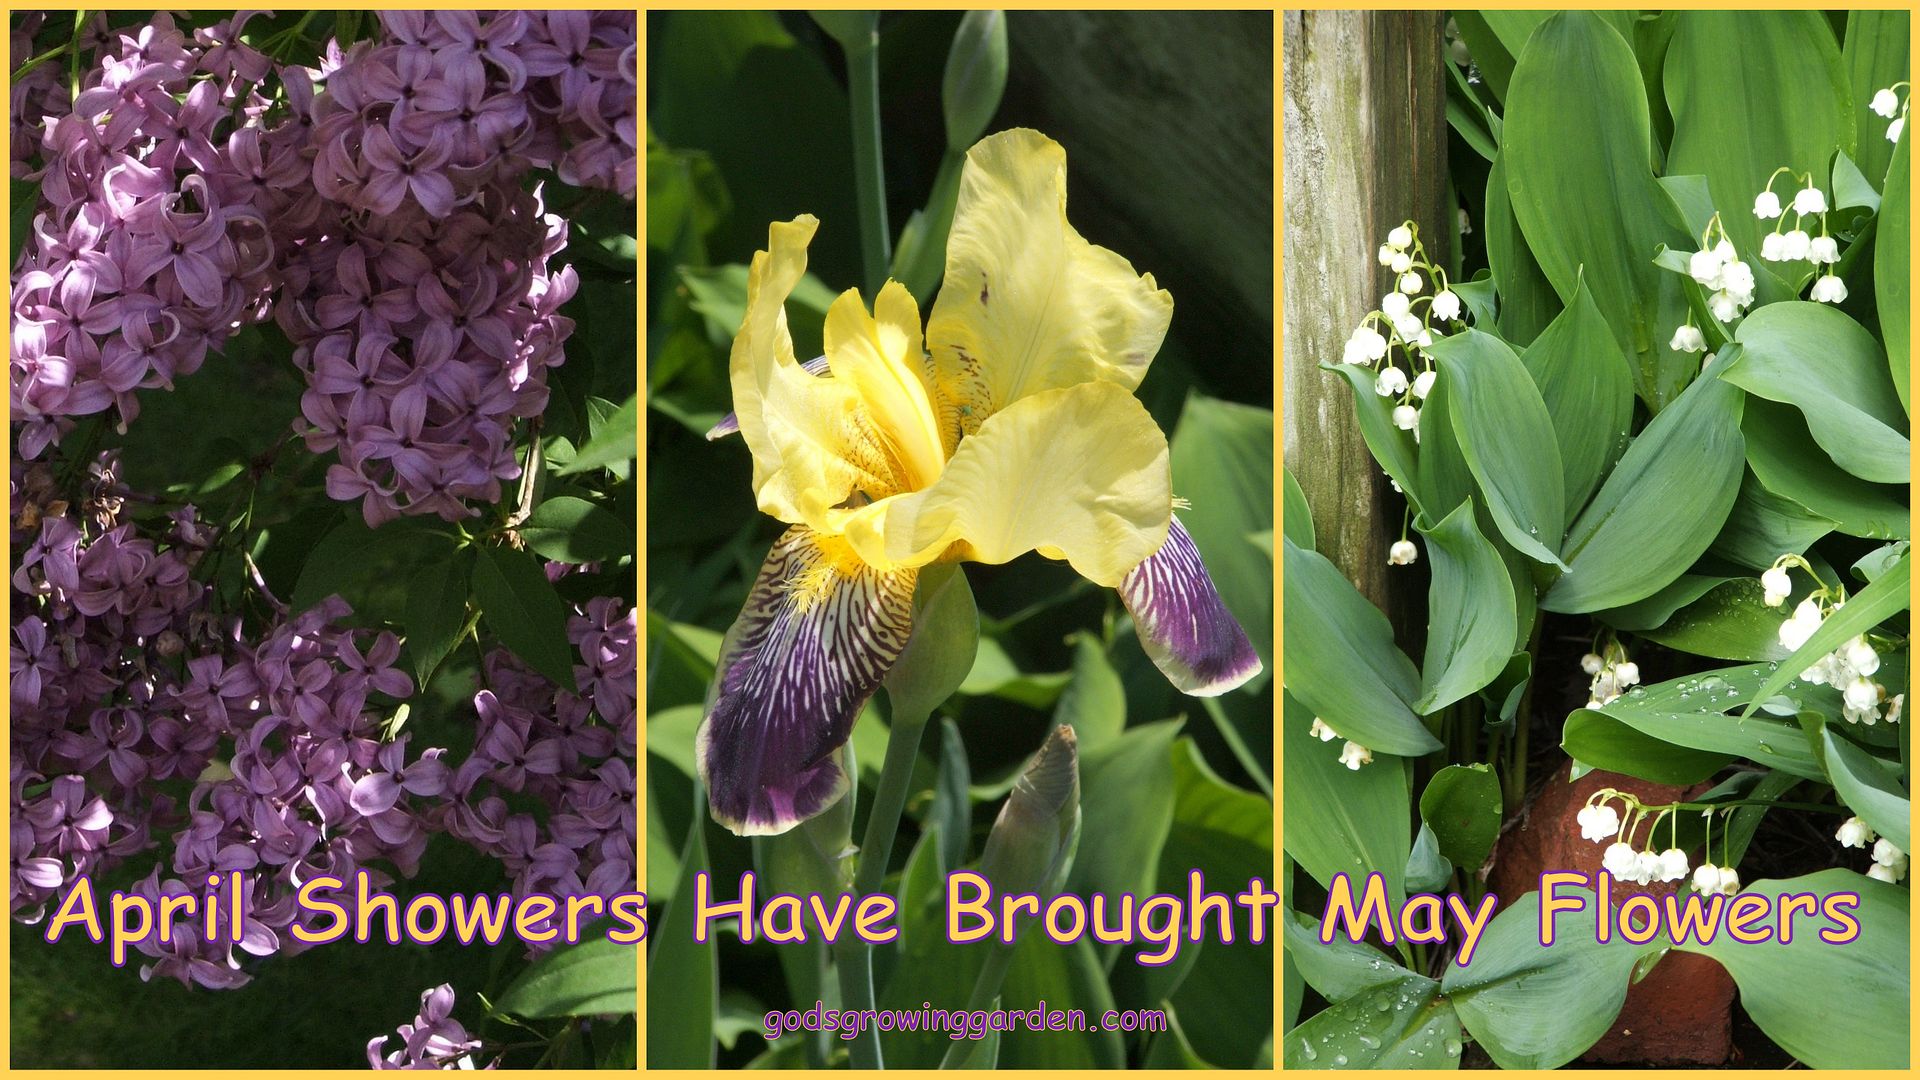 May Flowers by Angie Ouellette-Tower for godsgrowinggarden.com photo BlogStuff_zps90813549.jpg